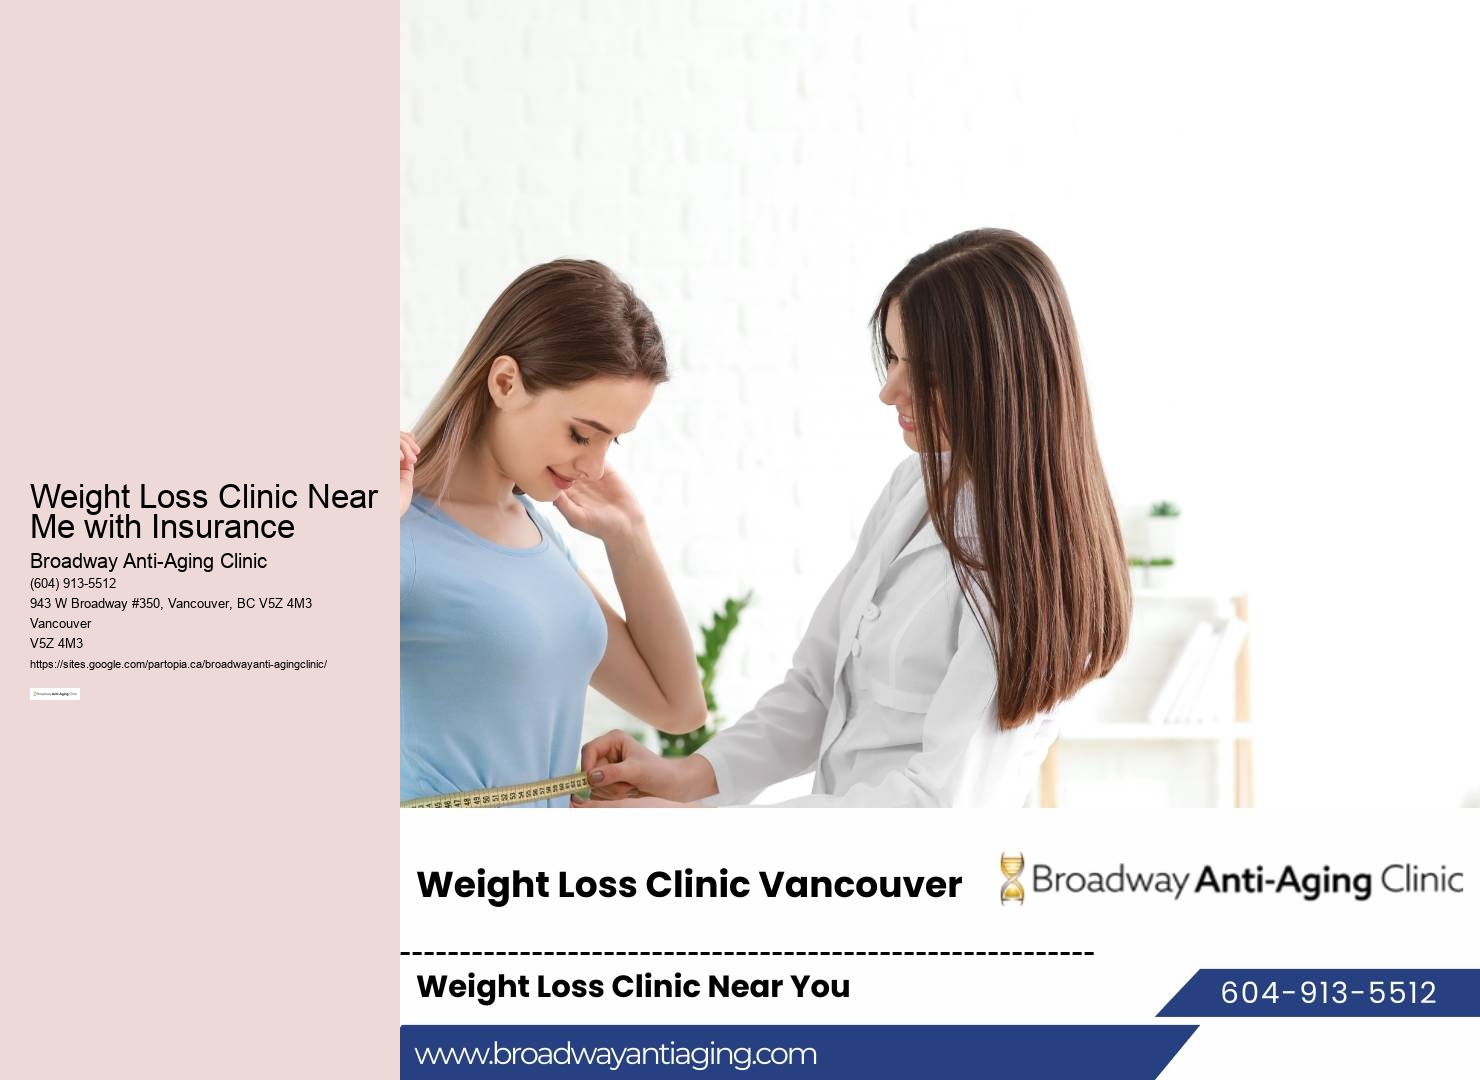 Weight Loss Clinic Near Me with Insurance